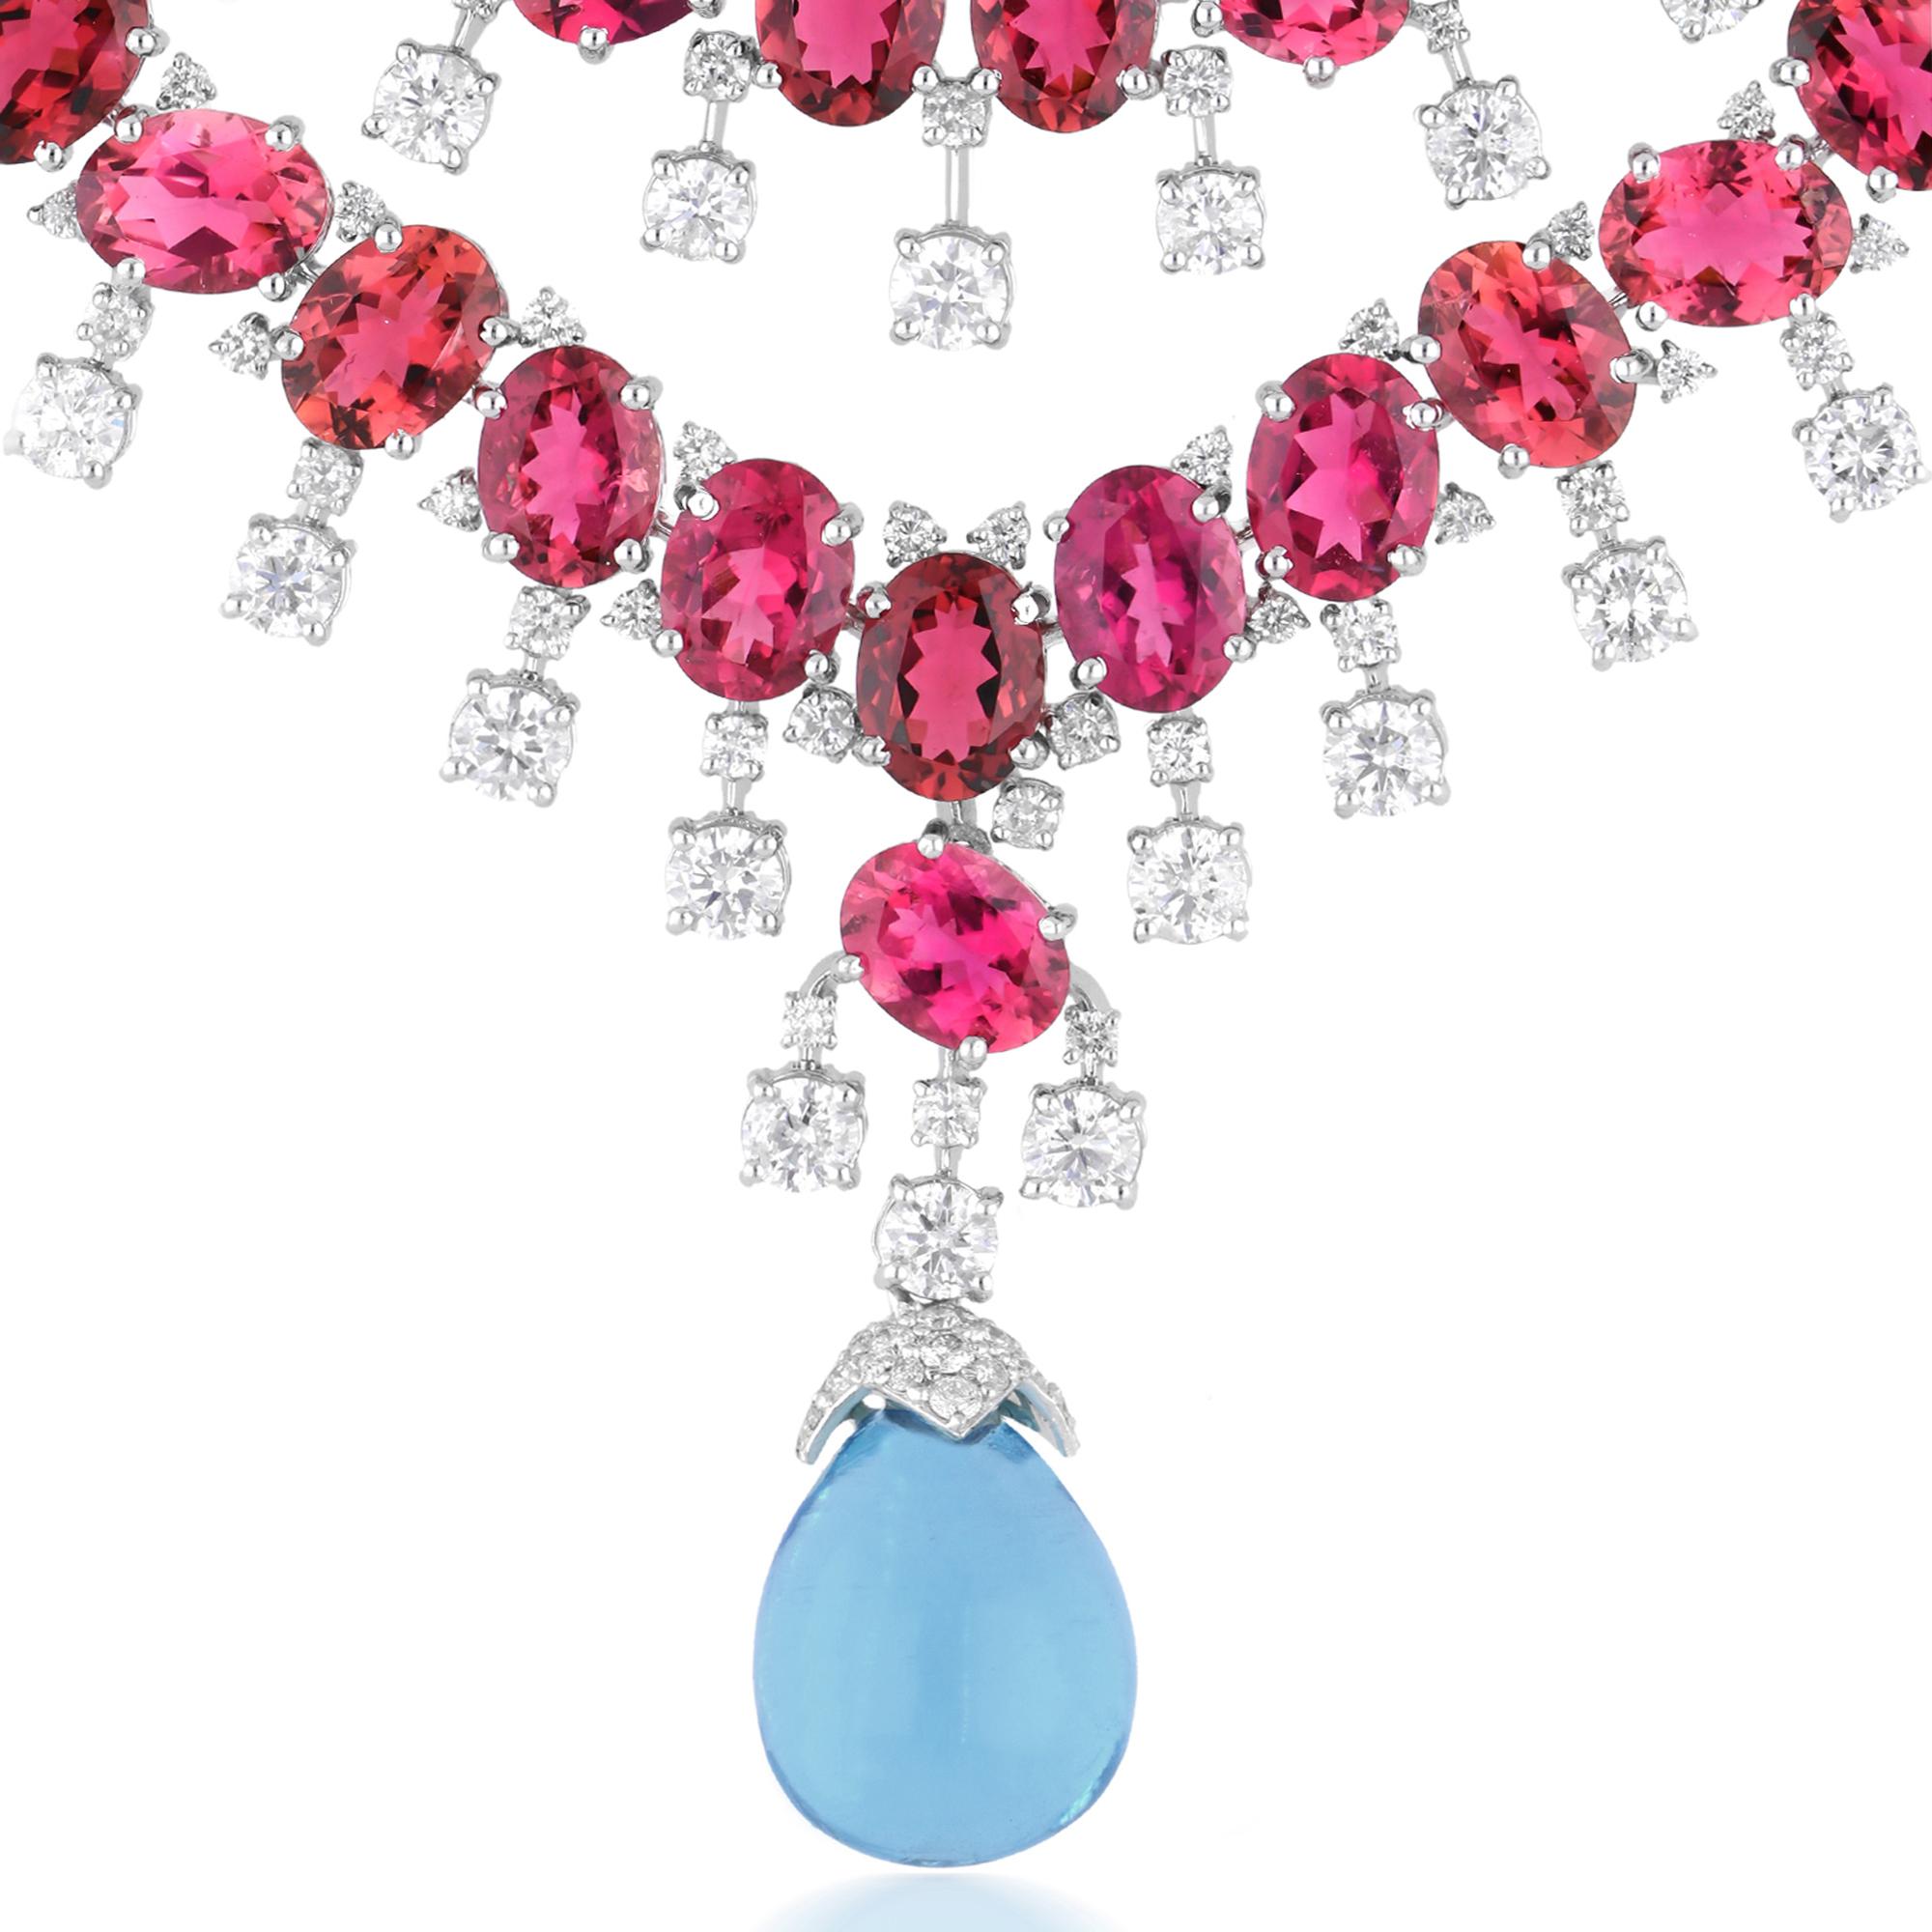 At the center of the necklace glistens a stunning Pink Tourmaline gemstone, radiating with a delicate hue that exudes femininity and grace. Surrounding the tourmaline are sparkling Diamonds, meticulously set to enhance its brilliance and allure. The